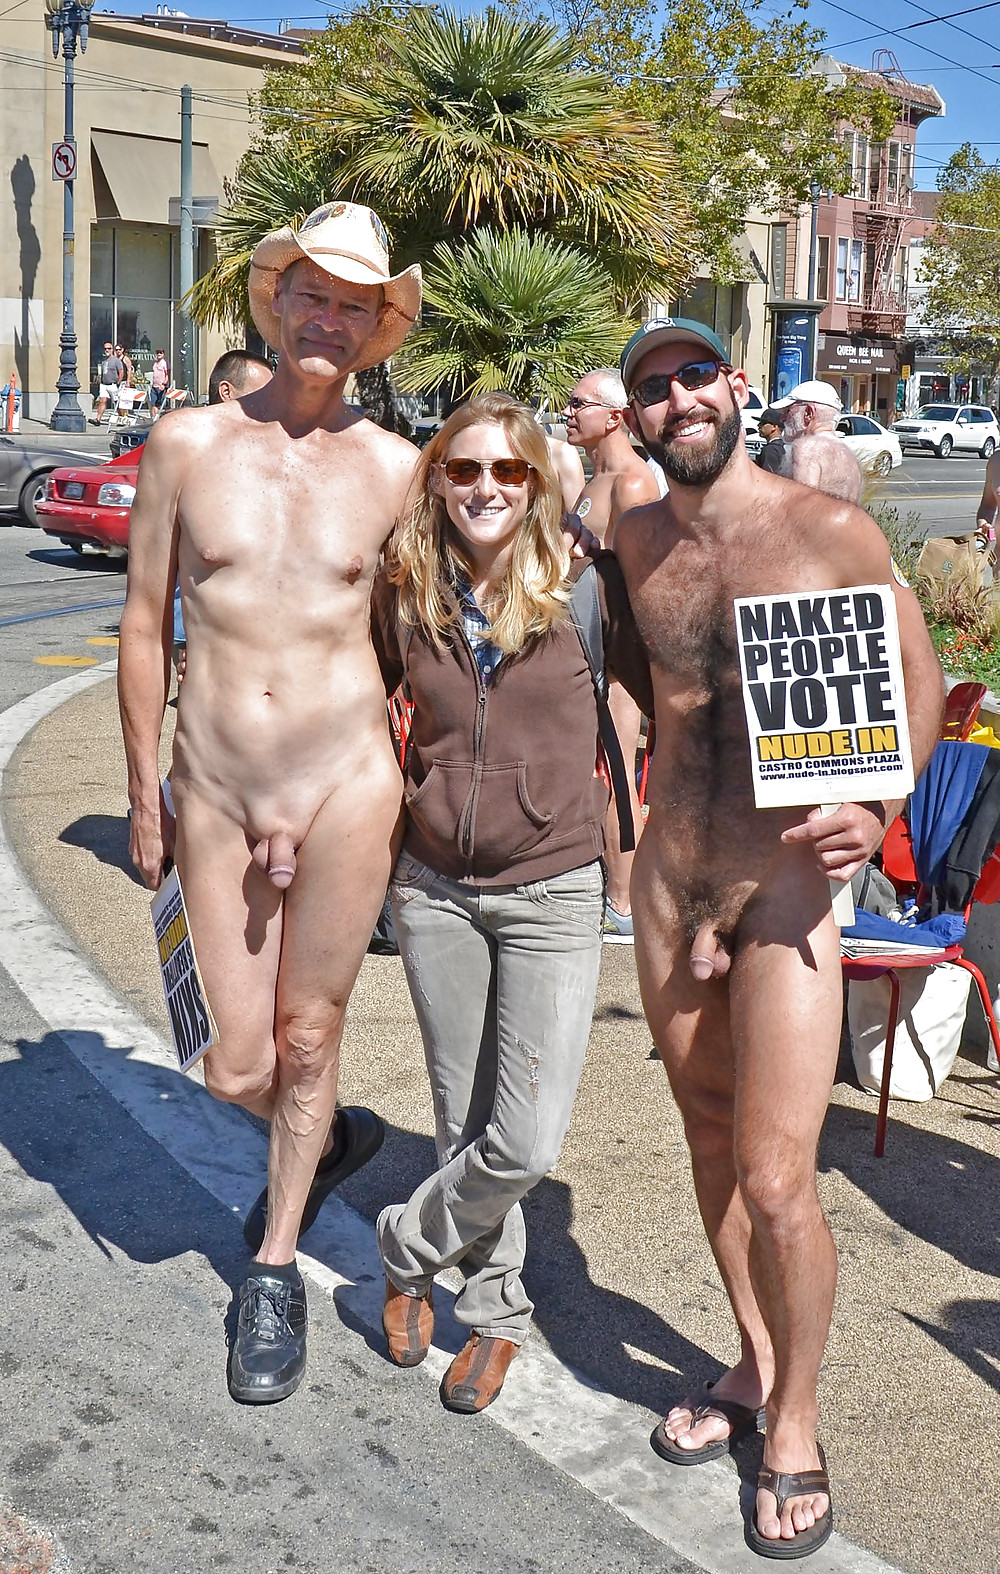 Clothed women with naked men. #16610465